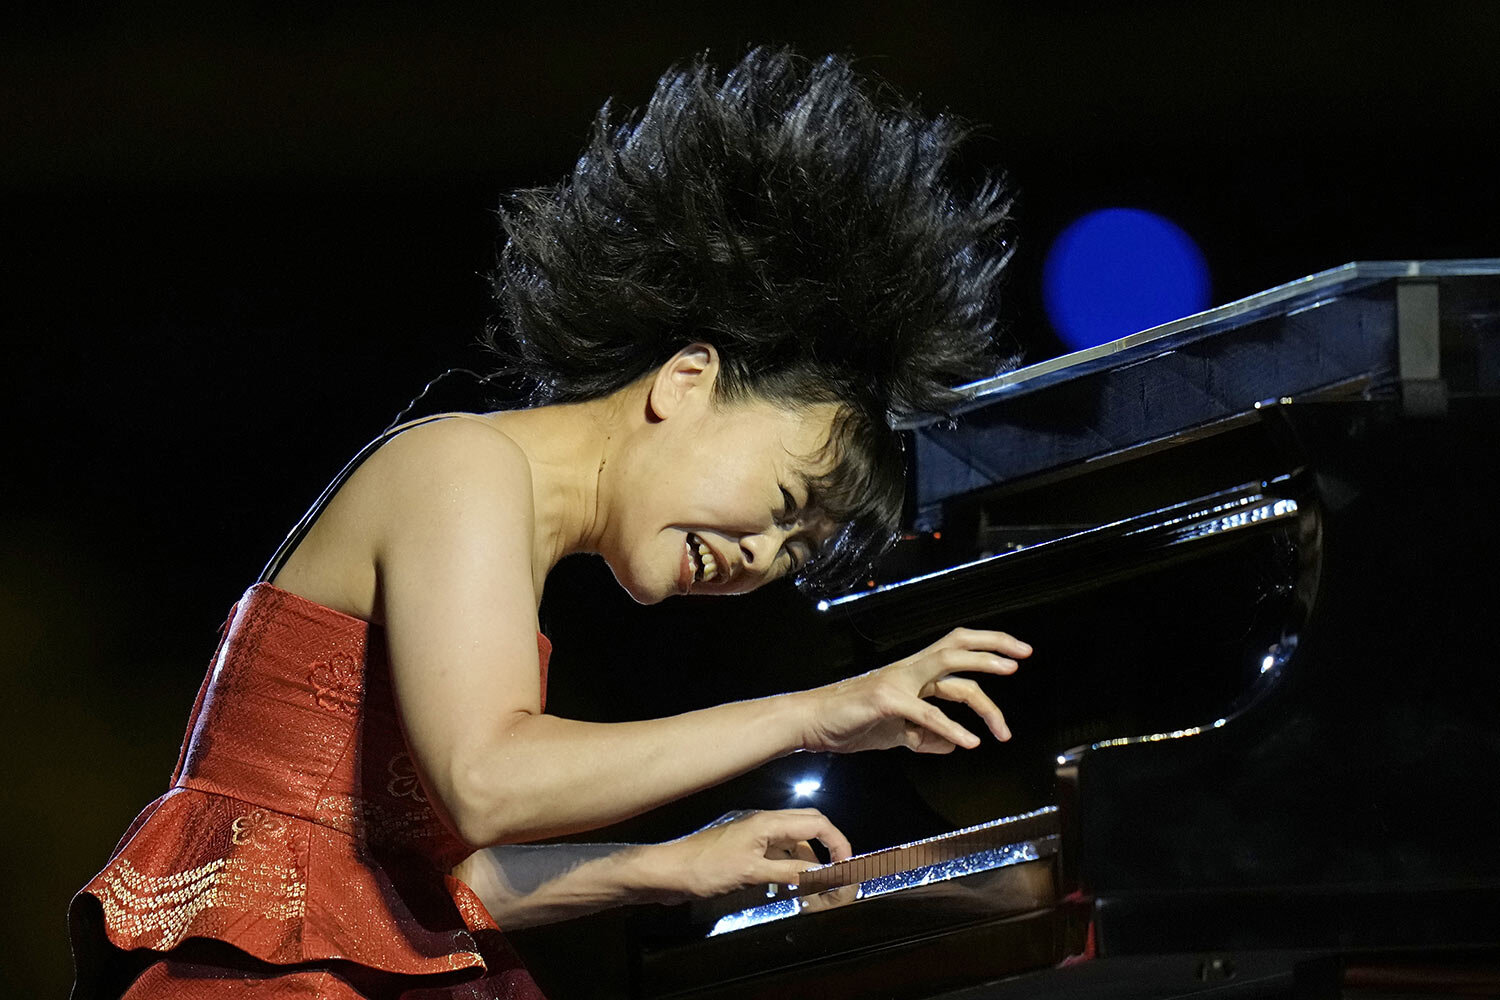  Hiromi performs during the opening ceremony in the Olympic Stadium at the 2020 Summer Olympics, Friday, July 23, 2021, in Tokyo, Japan. (AP Photo/Petr David Josek) 